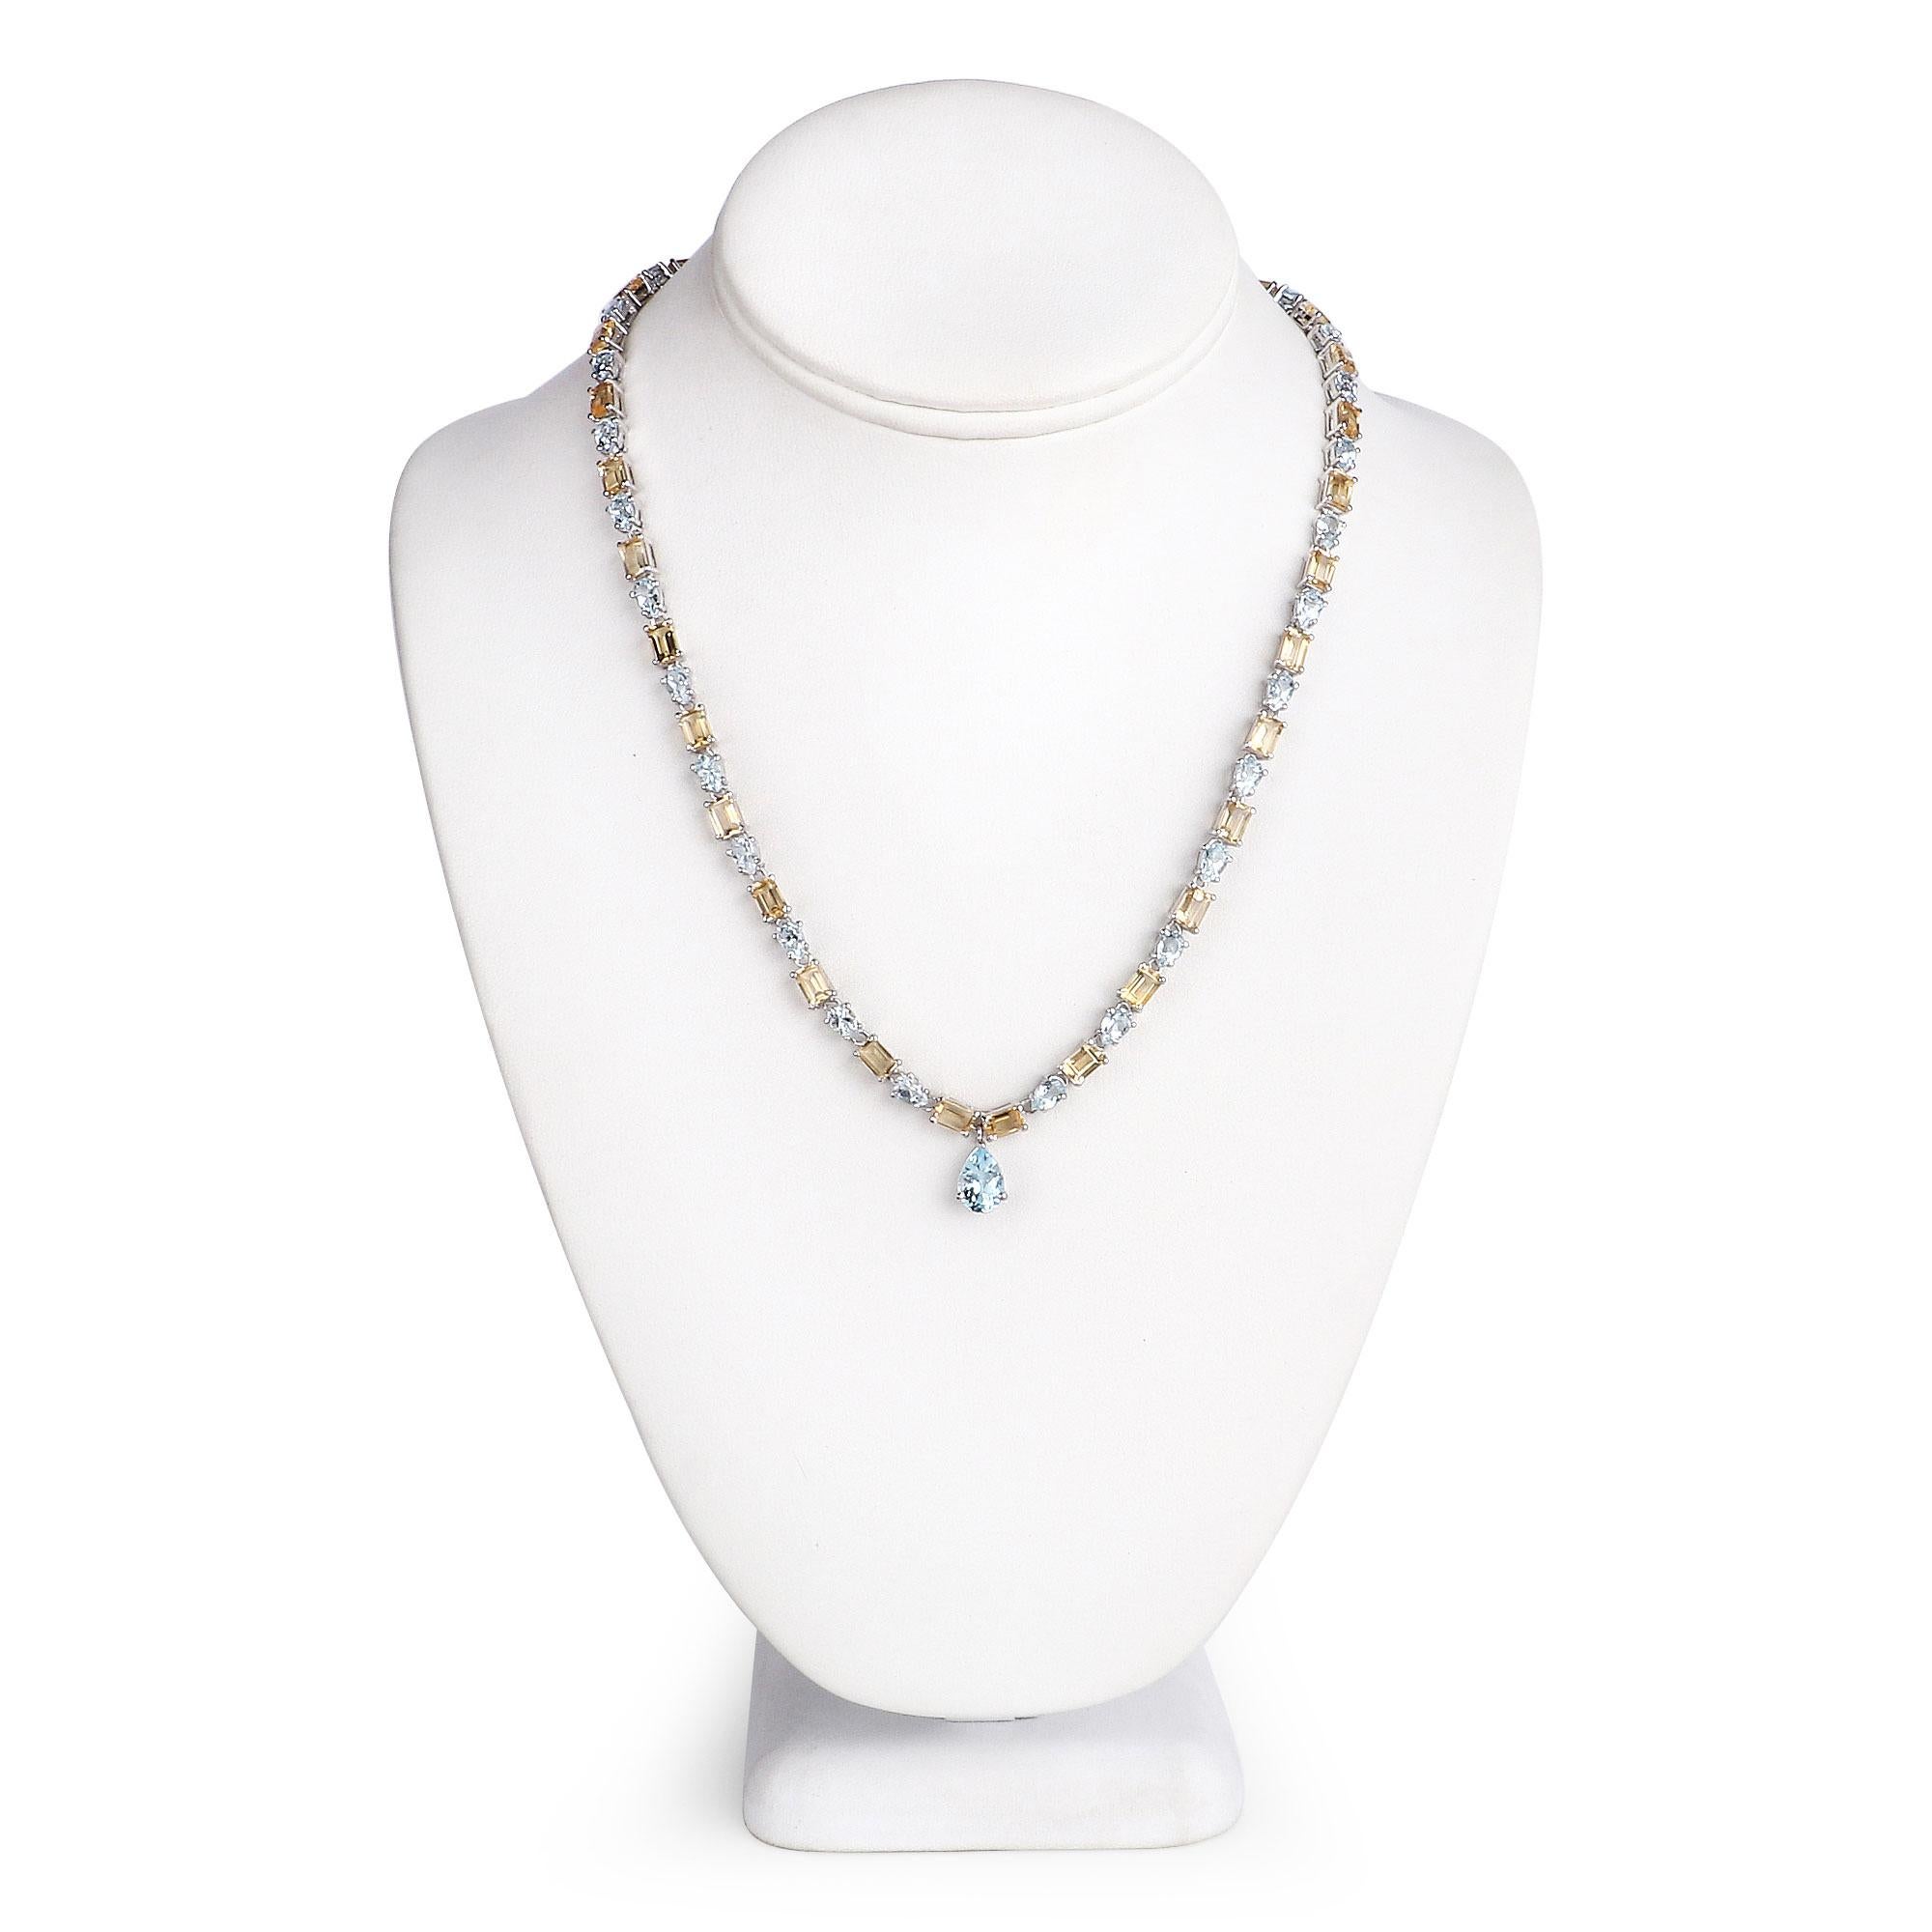 Natural Blue Topaz and Citrine Eternity Necklace 37 Carats Sterling Silver In Excellent Condition For Sale In Laguna Niguel, CA